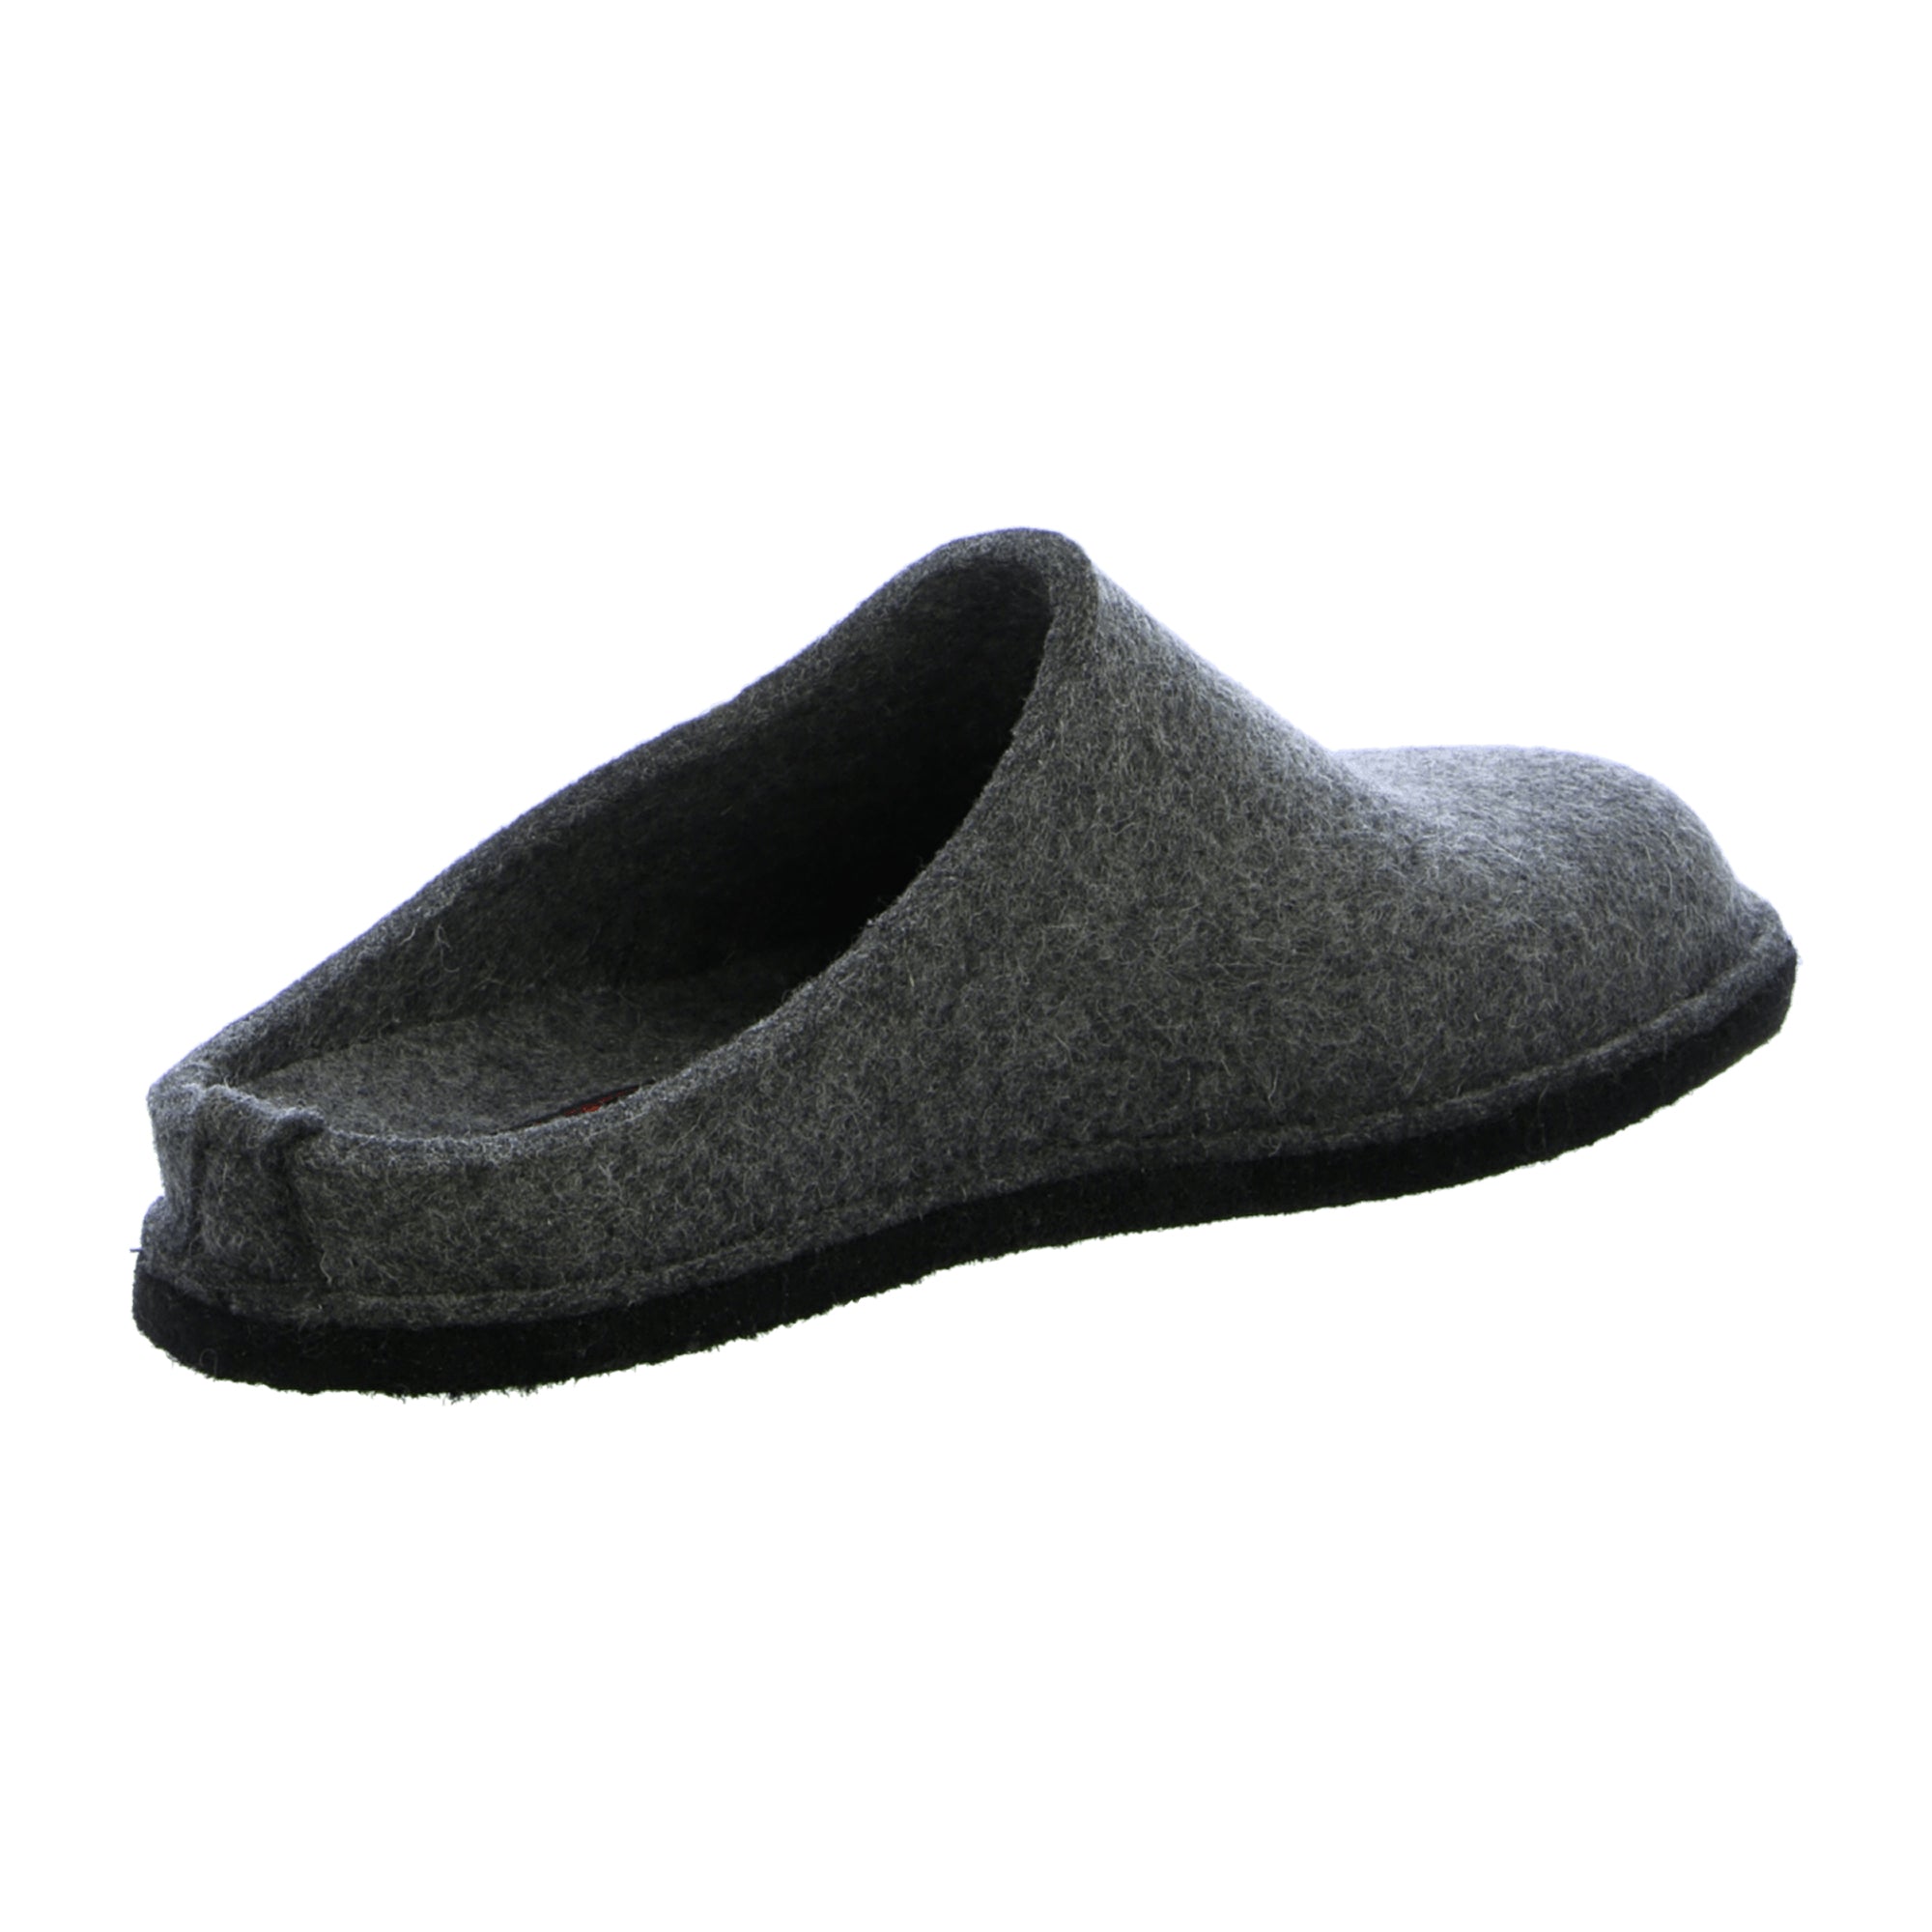 Haflinger Flair Soft Men's Slippers, Grey - Comfortable and Durable